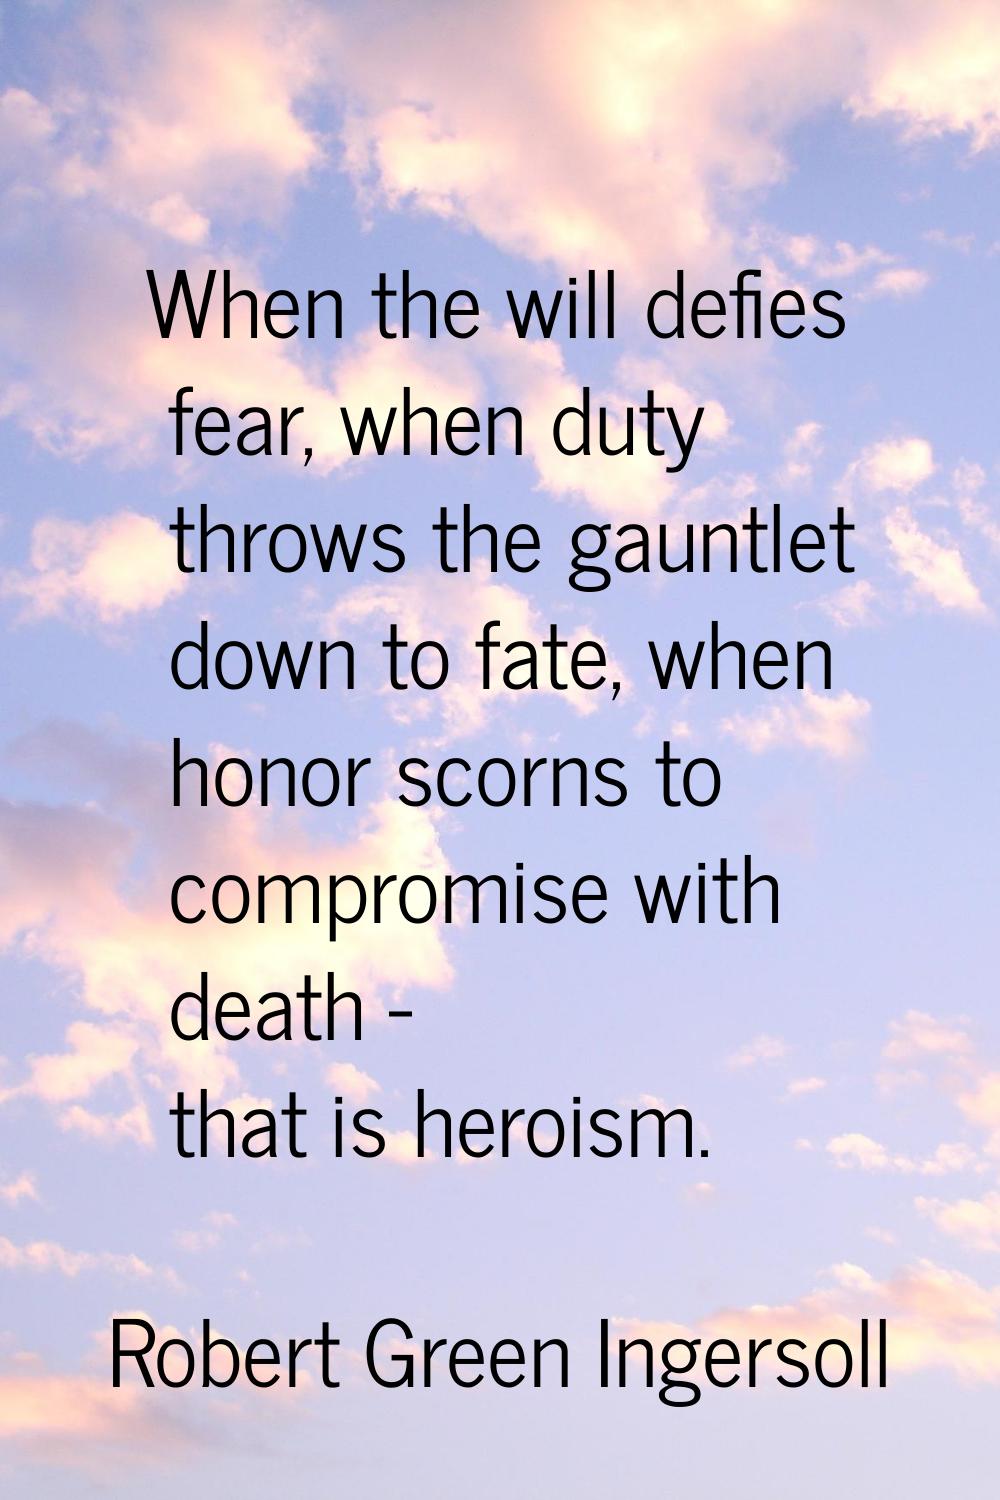 When the will defies fear, when duty throws the gauntlet down to fate, when honor scorns to comprom